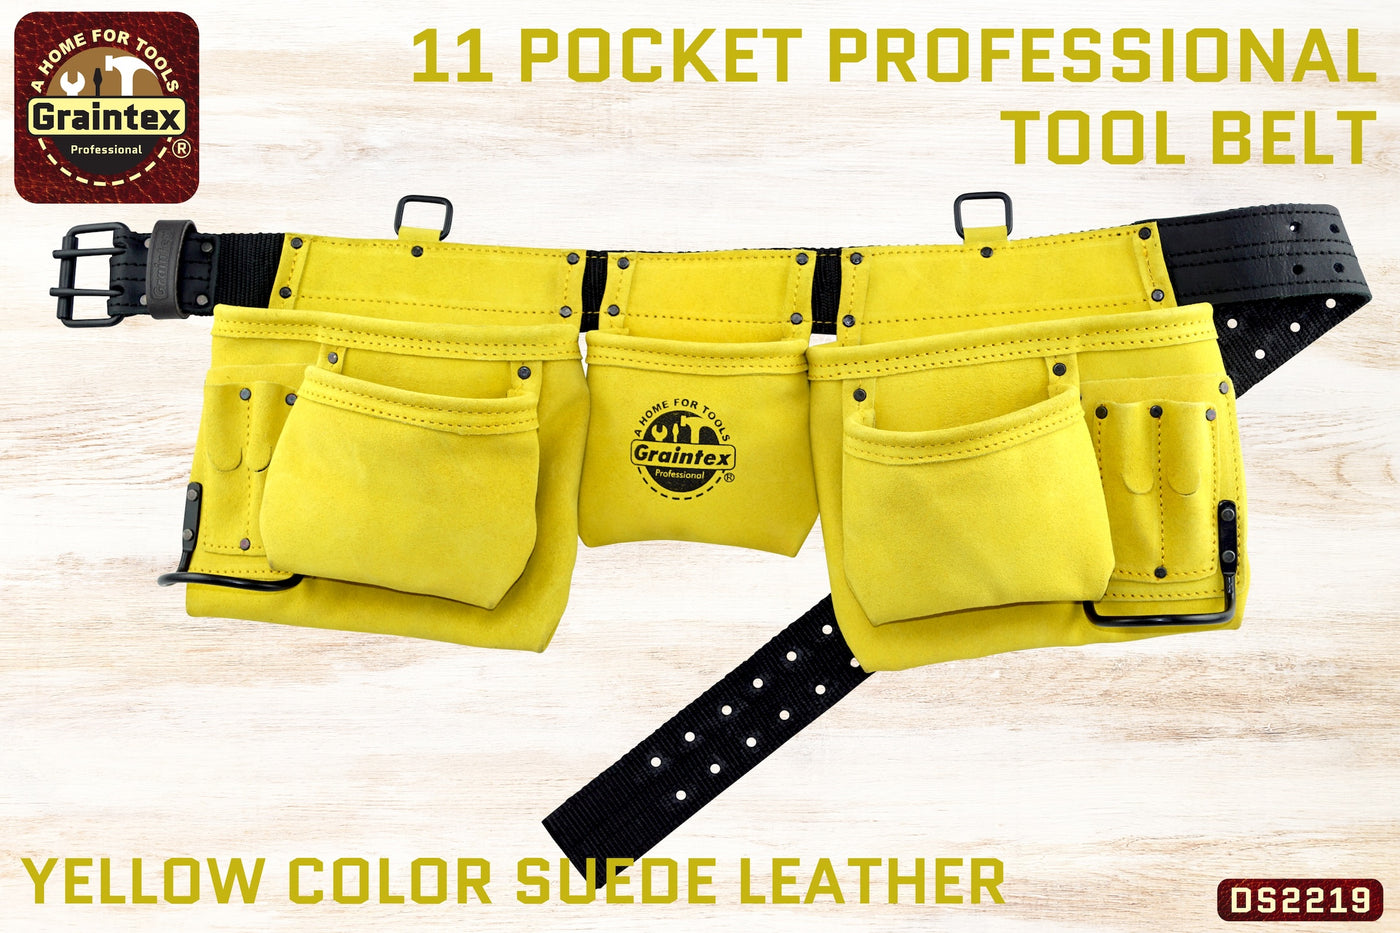 DS2219 :: 11 POCKET PROFESSIONAL TOOL BELT YELLOW COLOR SUEDE LEATHER